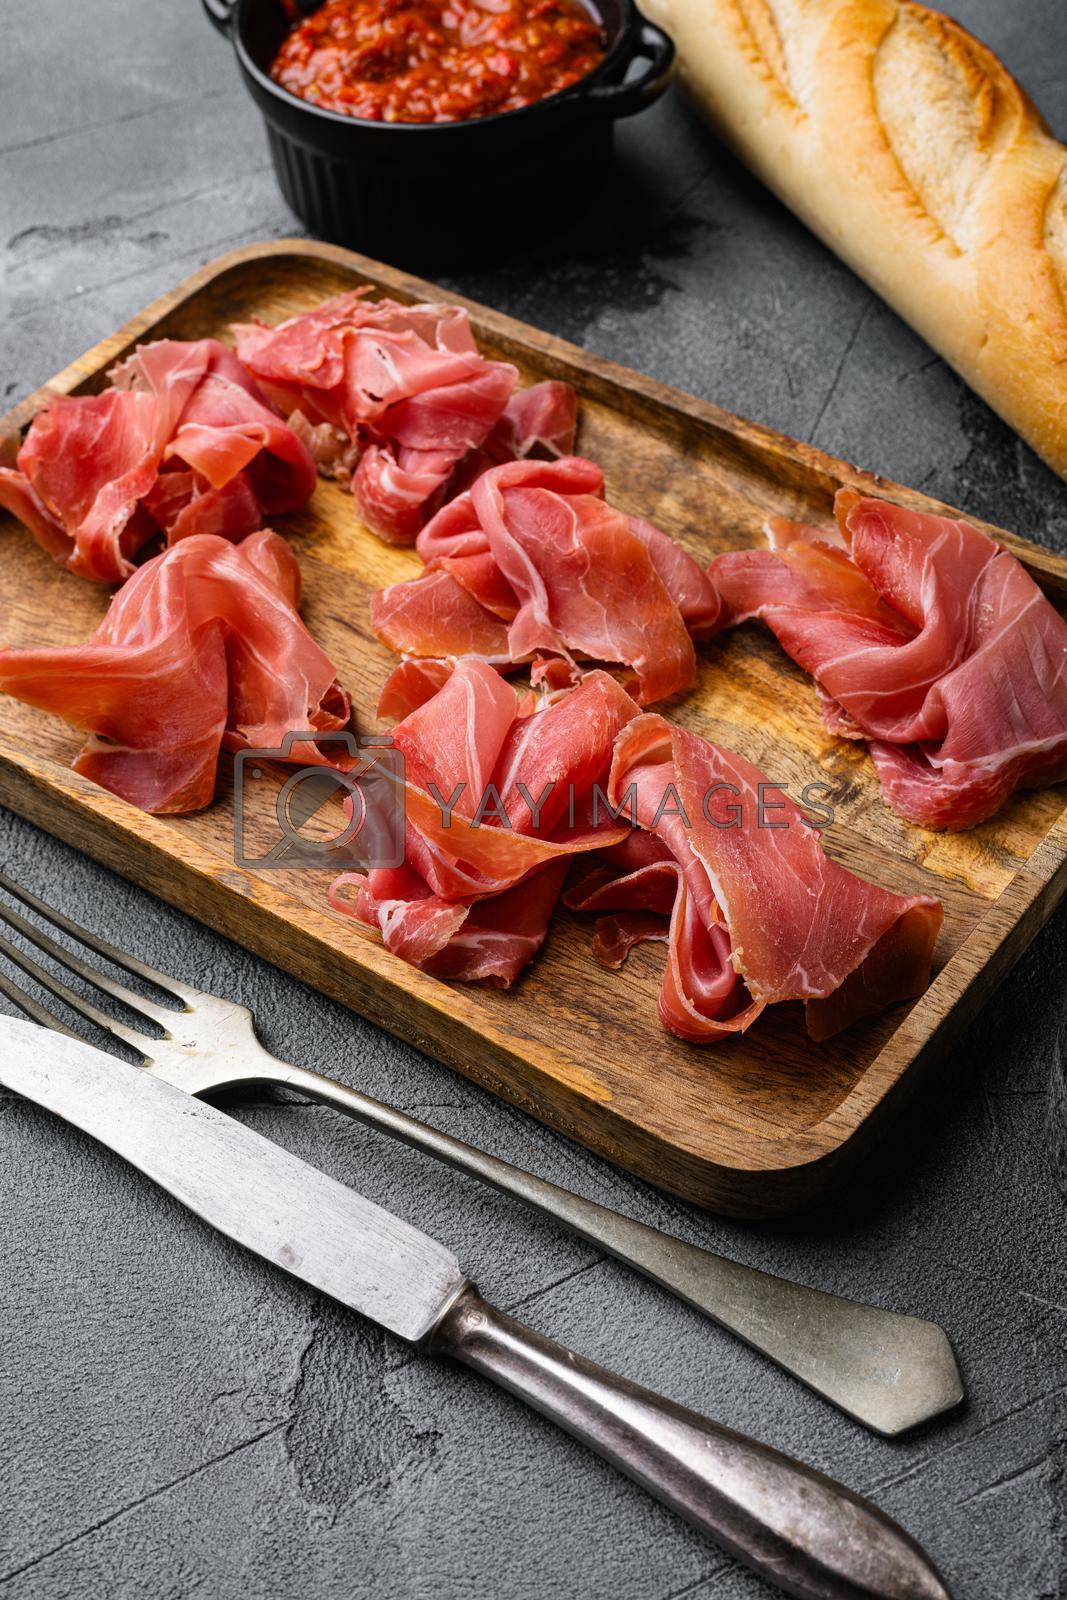 Royalty free image of Slices of prosciutto di parma or jamon serrano set, on gray stone table background by Ilianesolenyi